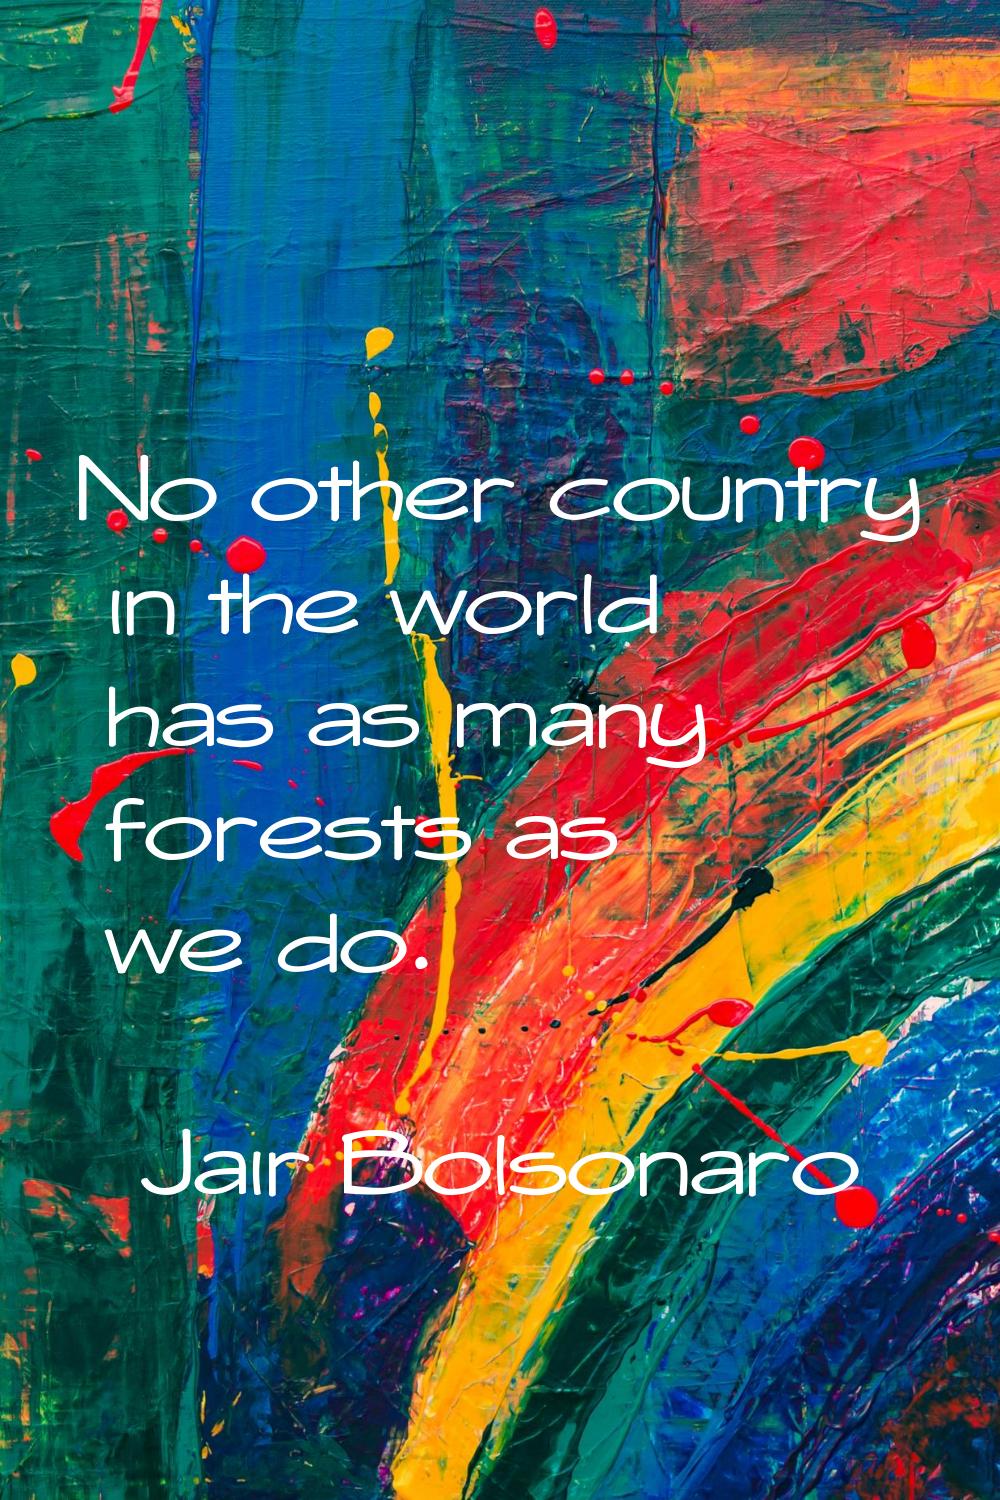 No other country in the world has as many forests as we do.